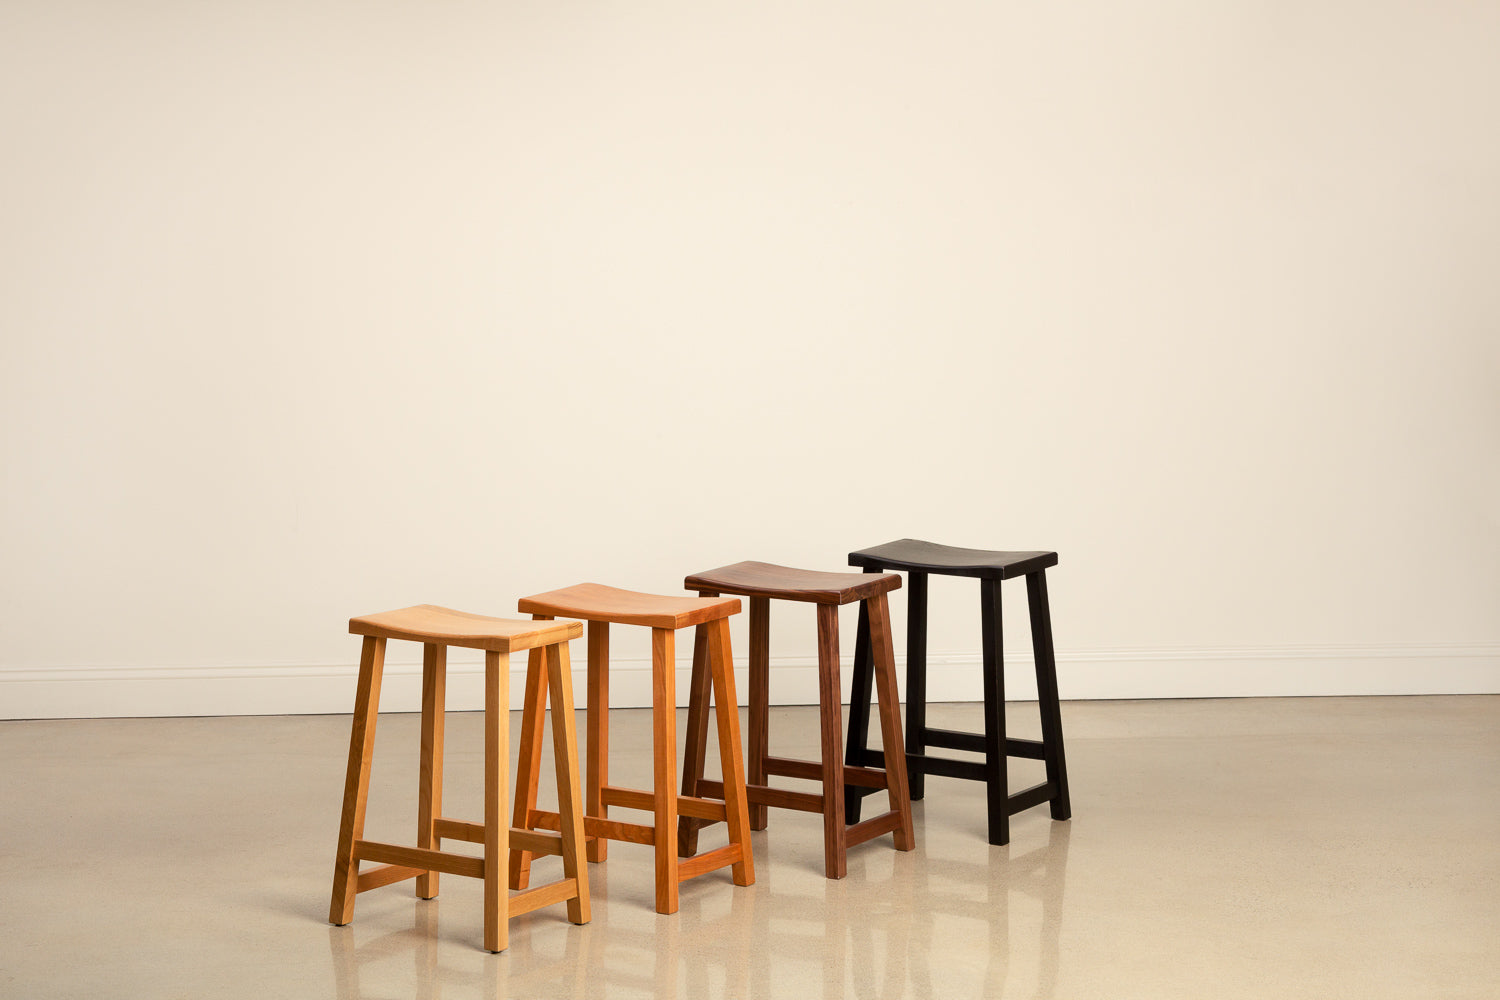 Kenzai counter stools in a rainbow of woods including white oak, cherry, walnut and black